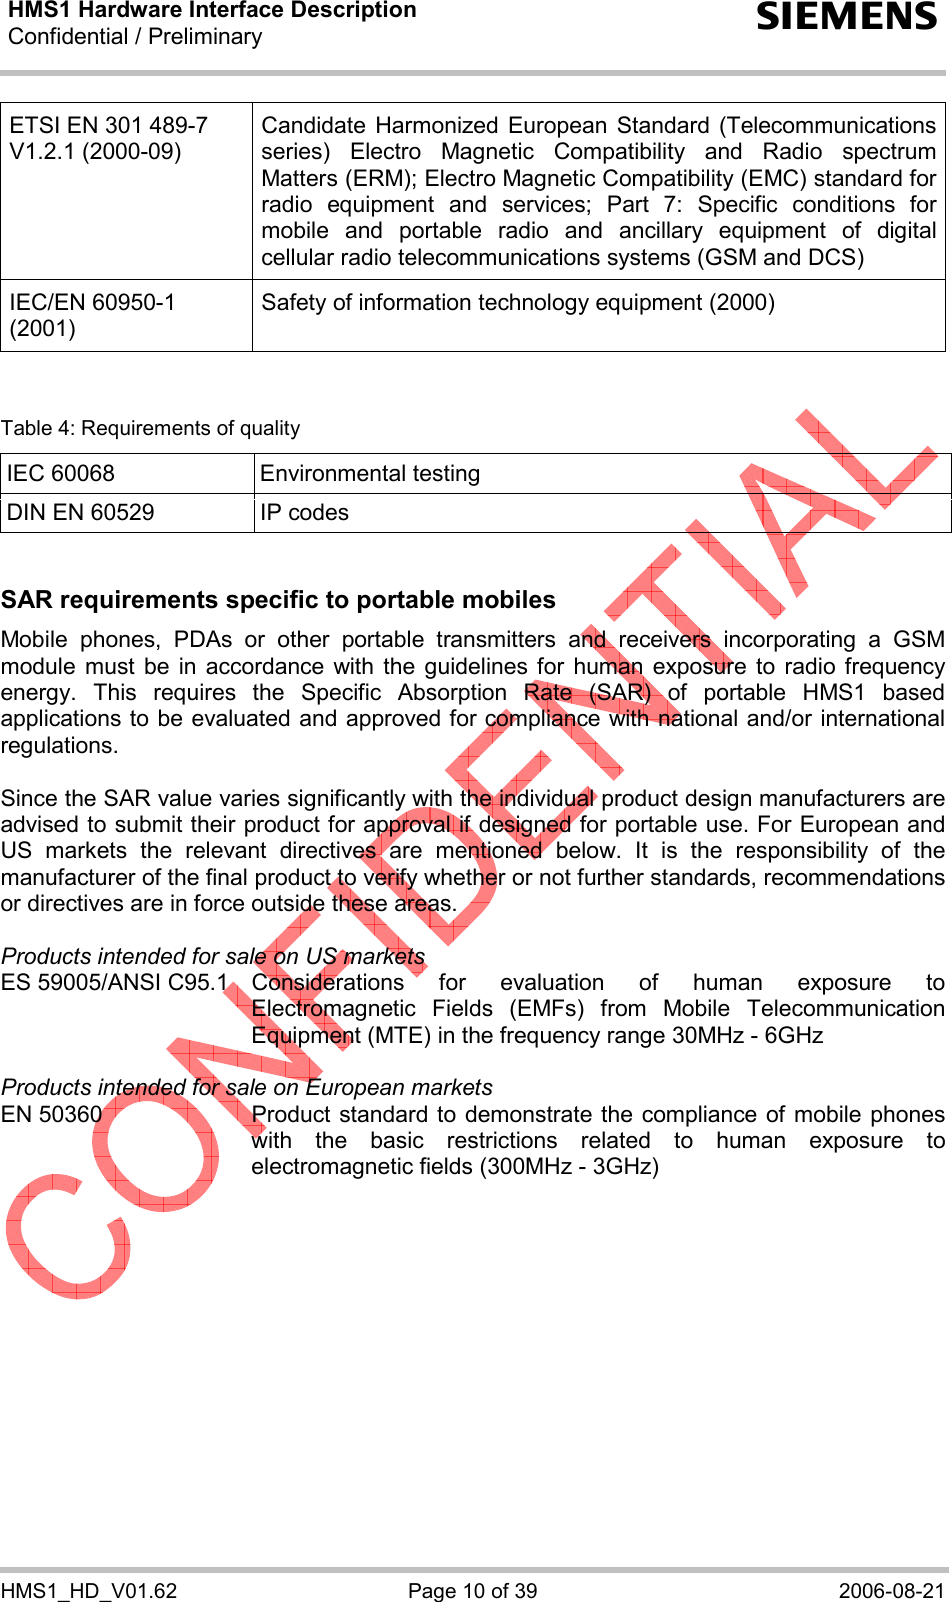 HMS1 Hardware Interface Description Confidential / Preliminary  s HMS1_HD_V01.62  Page 10 of 39  2006-08-21 ETSI EN 301 489-7 V1.2.1 (2000-09) Candidate Harmonized European Standard (Telecommunications series) Electro Magnetic Compatibility and Radio spectrum Matters (ERM); Electro Magnetic Compatibility (EMC) standard for radio equipment and services; Part 7: Specific conditions for mobile and portable radio and ancillary equipment of digital cellular radio telecommunications systems (GSM and DCS) IEC/EN 60950-1 (2001) Safety of information technology equipment (2000)   Table 4: Requirements of quality IEC 60068  Environmental testing DIN EN 60529  IP codes   SAR requirements specific to portable mobiles Mobile phones, PDAs or other portable transmitters and receivers incorporating a GSM module must be in accordance with the guidelines for human exposure to radio frequency energy. This requires the Specific Absorption Rate (SAR) of portable HMS1 based applications to be evaluated and approved for compliance with national and/or international regulations.   Since the SAR value varies significantly with the individual product design manufacturers are advised to submit their product for approval if designed for portable use. For European and US markets the relevant directives are mentioned below. It is the responsibility of the manufacturer of the final product to verify whether or not further standards, recommendations or directives are in force outside these areas.   Products intended for sale on US markets ES 59005/ANSI C95.1 Considerations for evaluation of human exposure to Electromagnetic Fields (EMFs) from Mobile Telecommunication Equipment (MTE) in the frequency range 30MHz - 6GHz   Products intended for sale on European markets EN 50360  Product standard to demonstrate the compliance of mobile phones with the basic restrictions related to human exposure to electromagnetic fields (300MHz - 3GHz)  